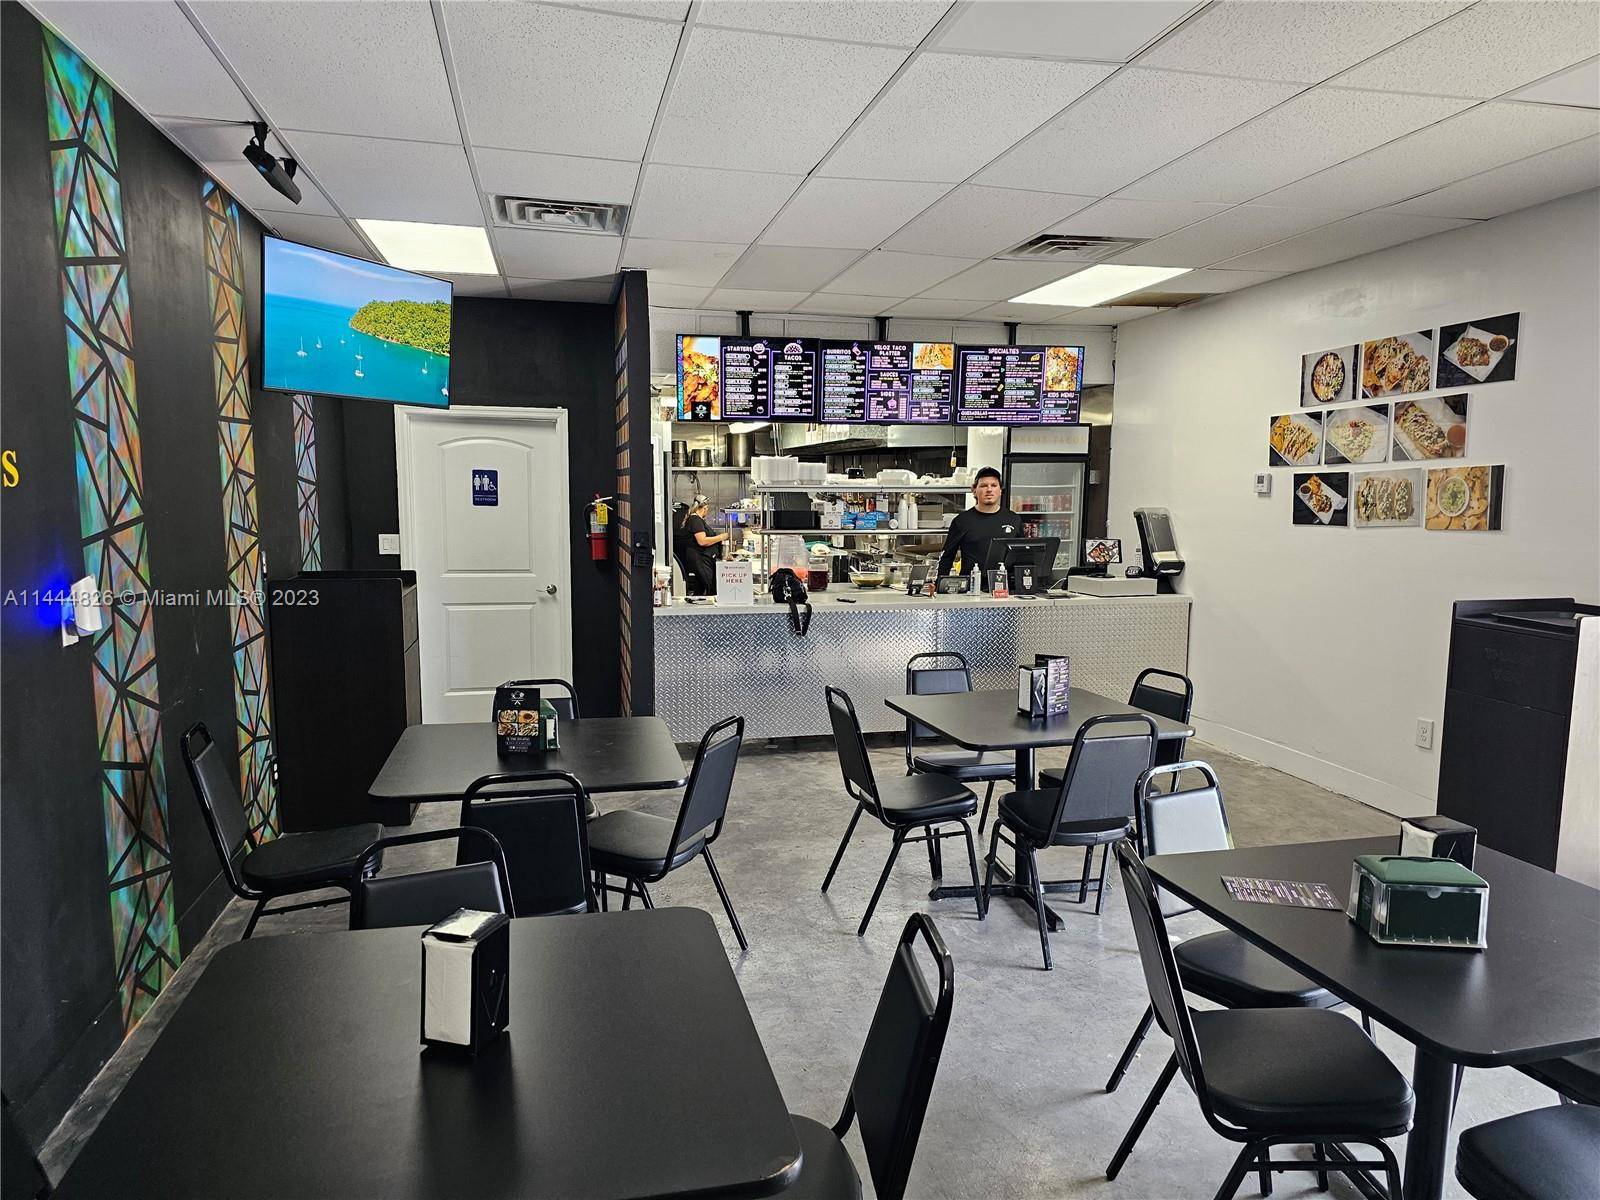 Wonderful restaurant with an amazing location in heavy traffic avenue in Doral in the middle of and industrial area, delivery service is strong !